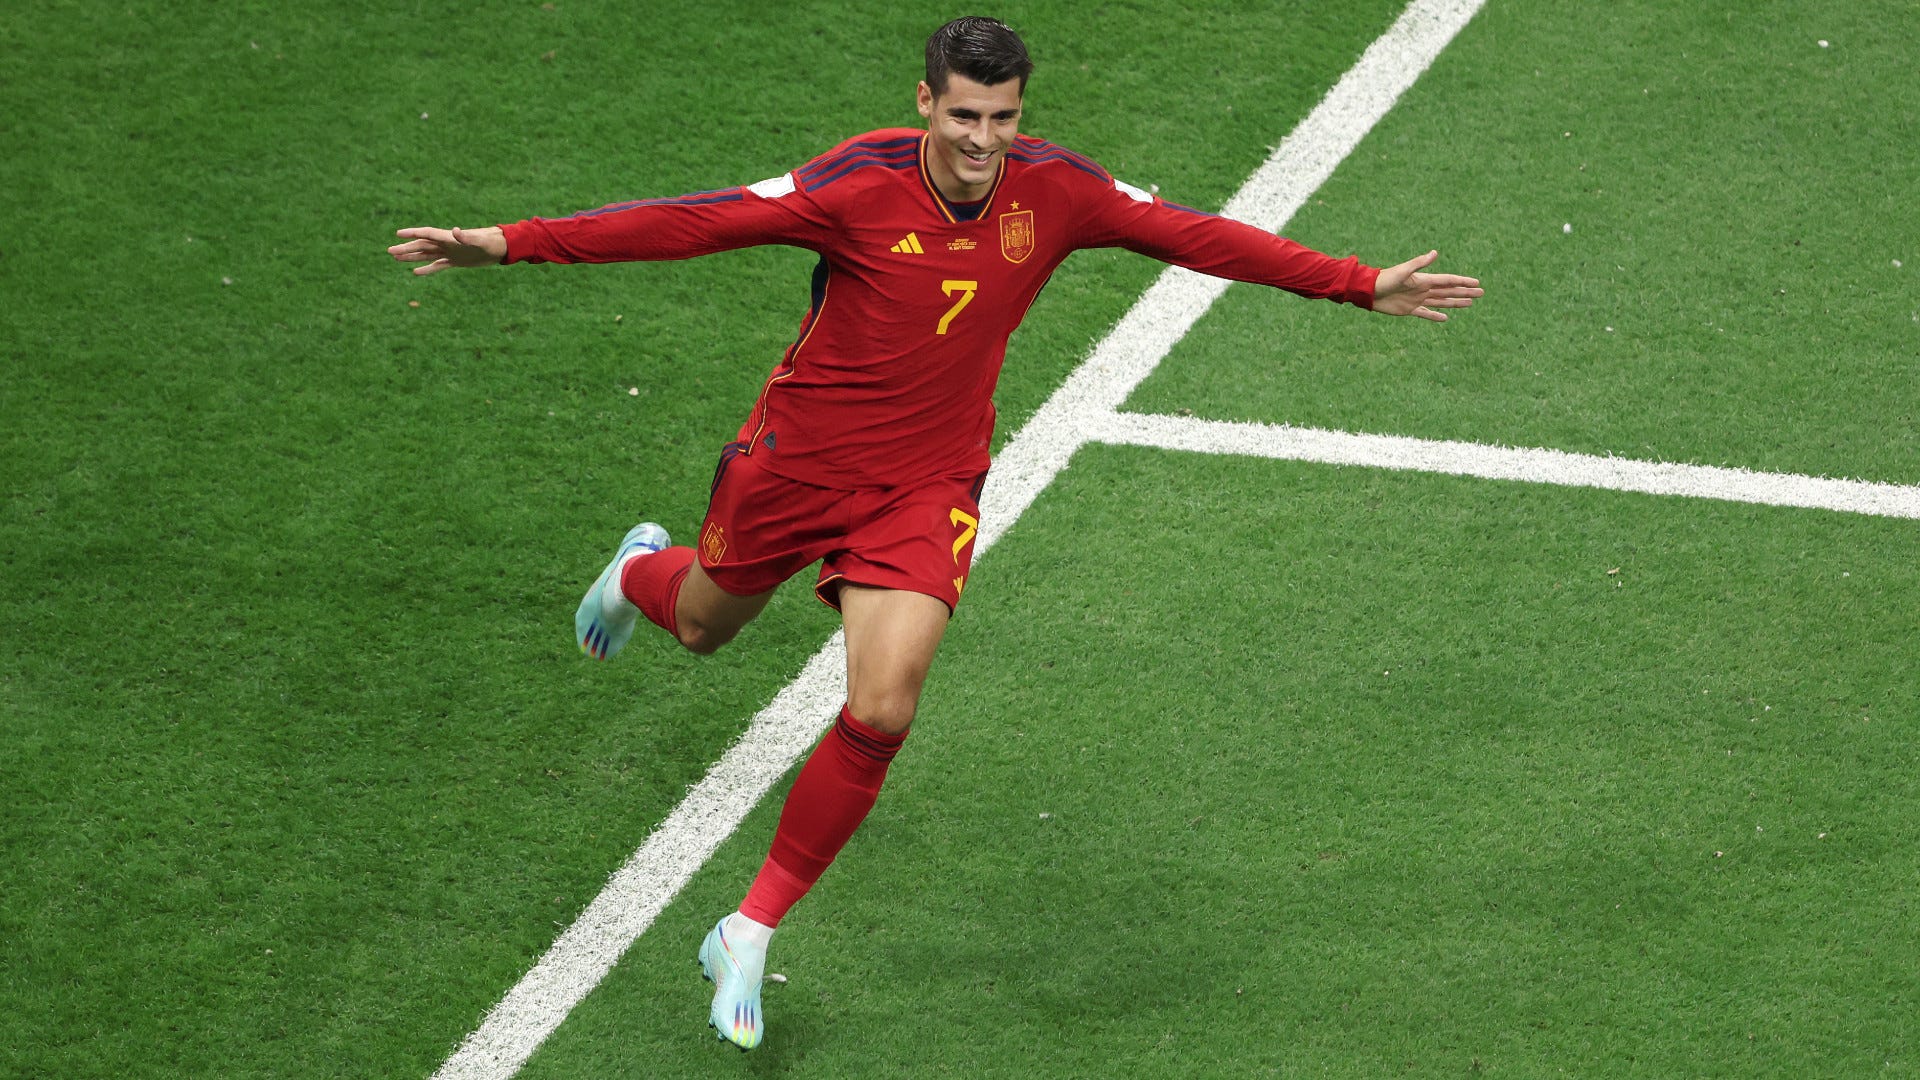 WATCH: Super-sub Morata produces clever finish from delightful Olmo pass to  put Spain in front vs Germany  Cameroon